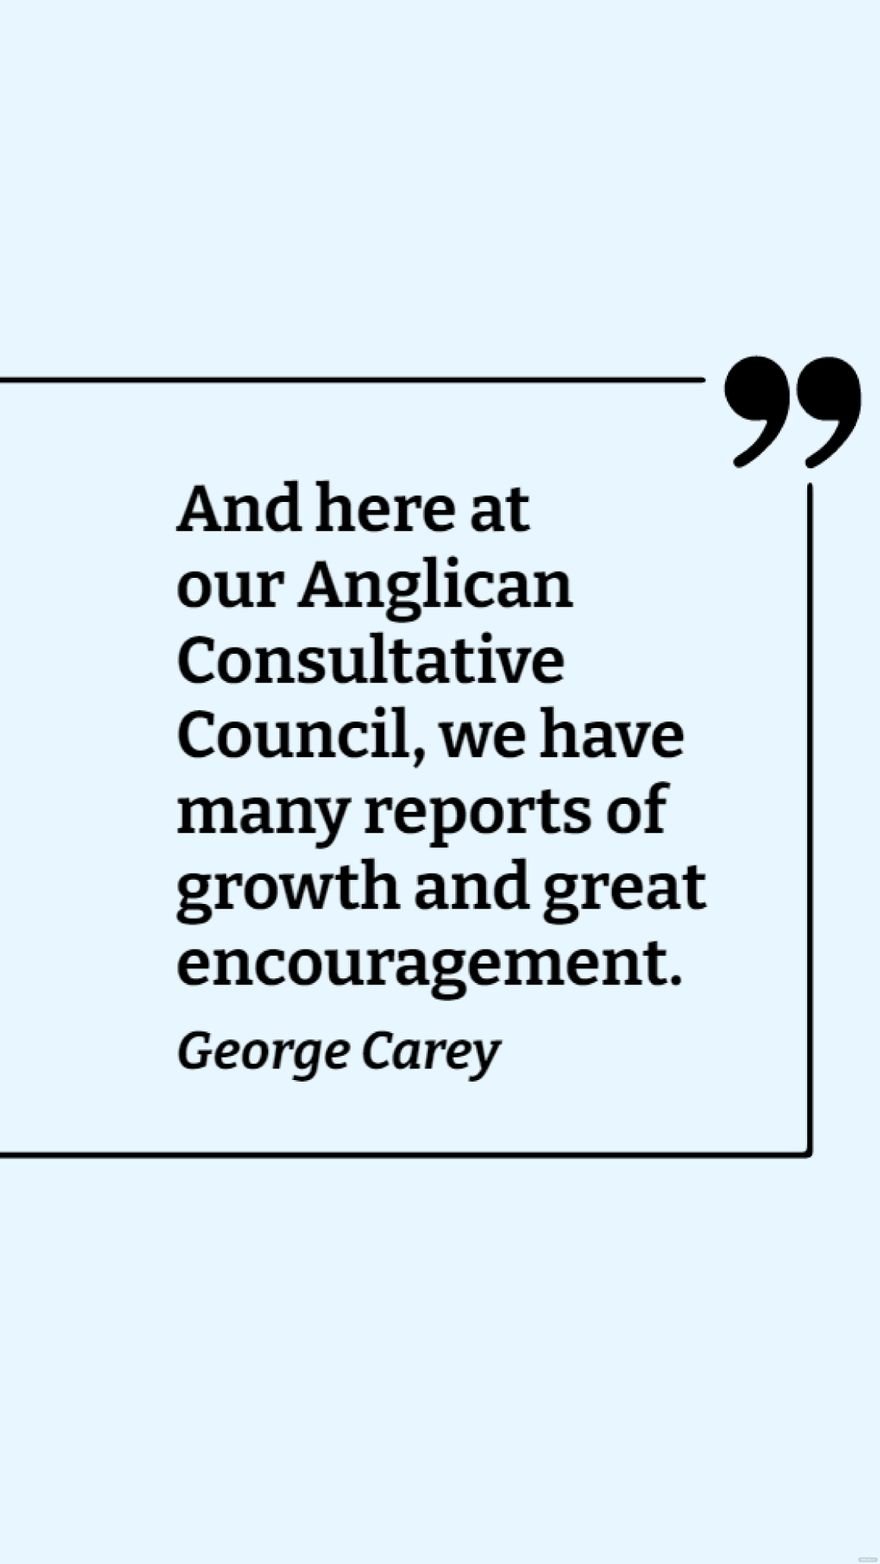 George Carey - And here at our Anglican Consultative Council, we have many reports of growth and great encouragement. Template